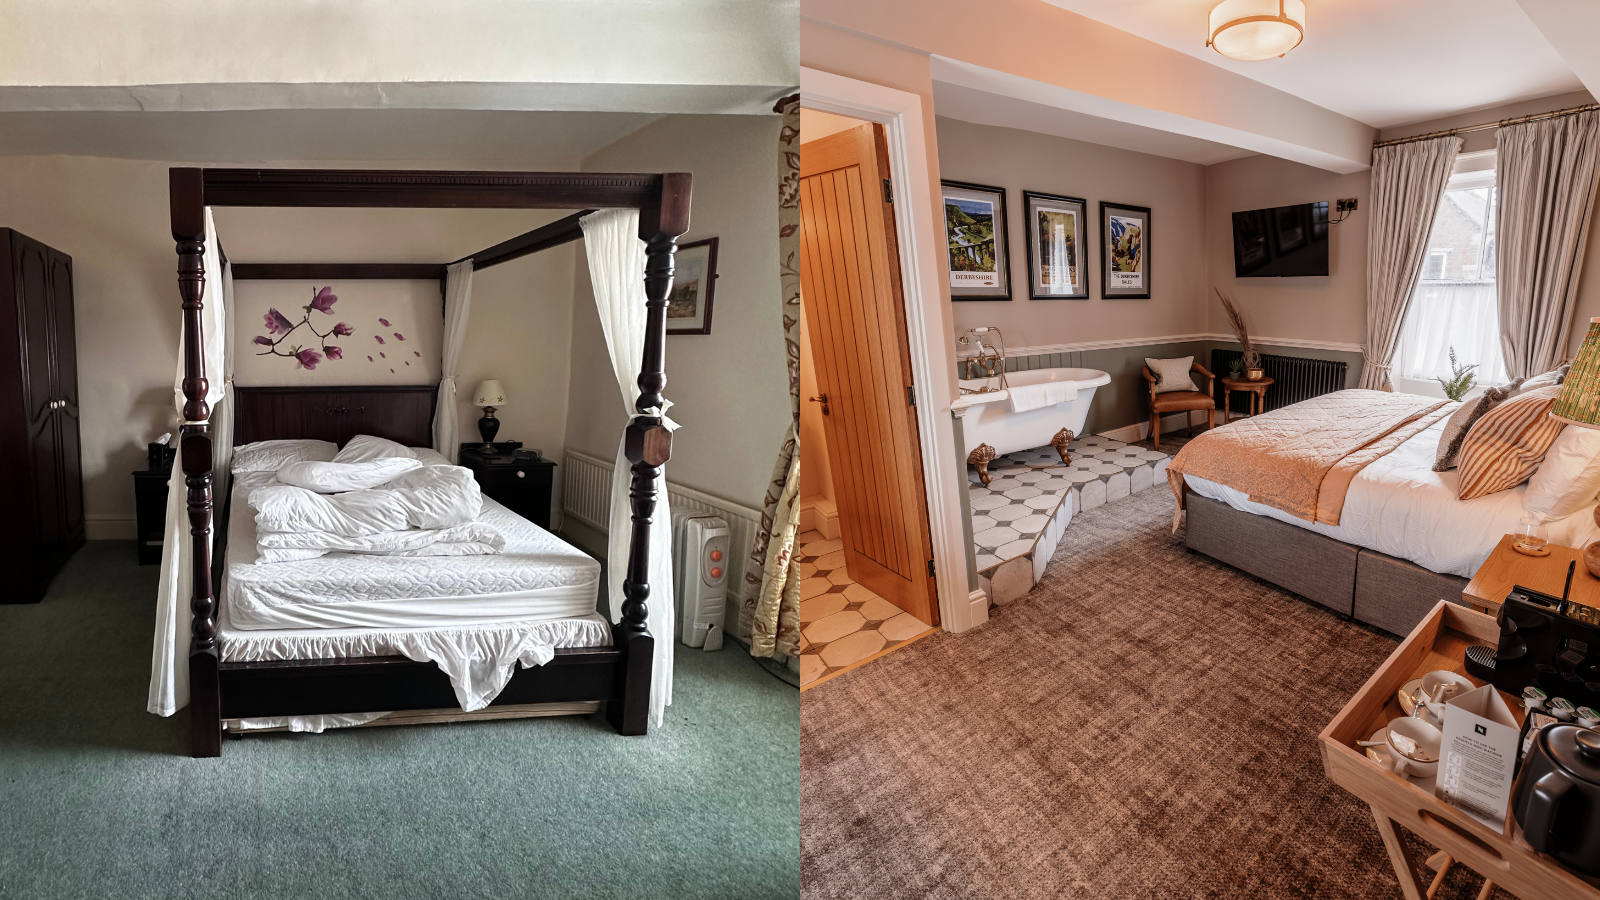 A side by side photo showing a bedroom at The Ashford Arms before and after refurbishment